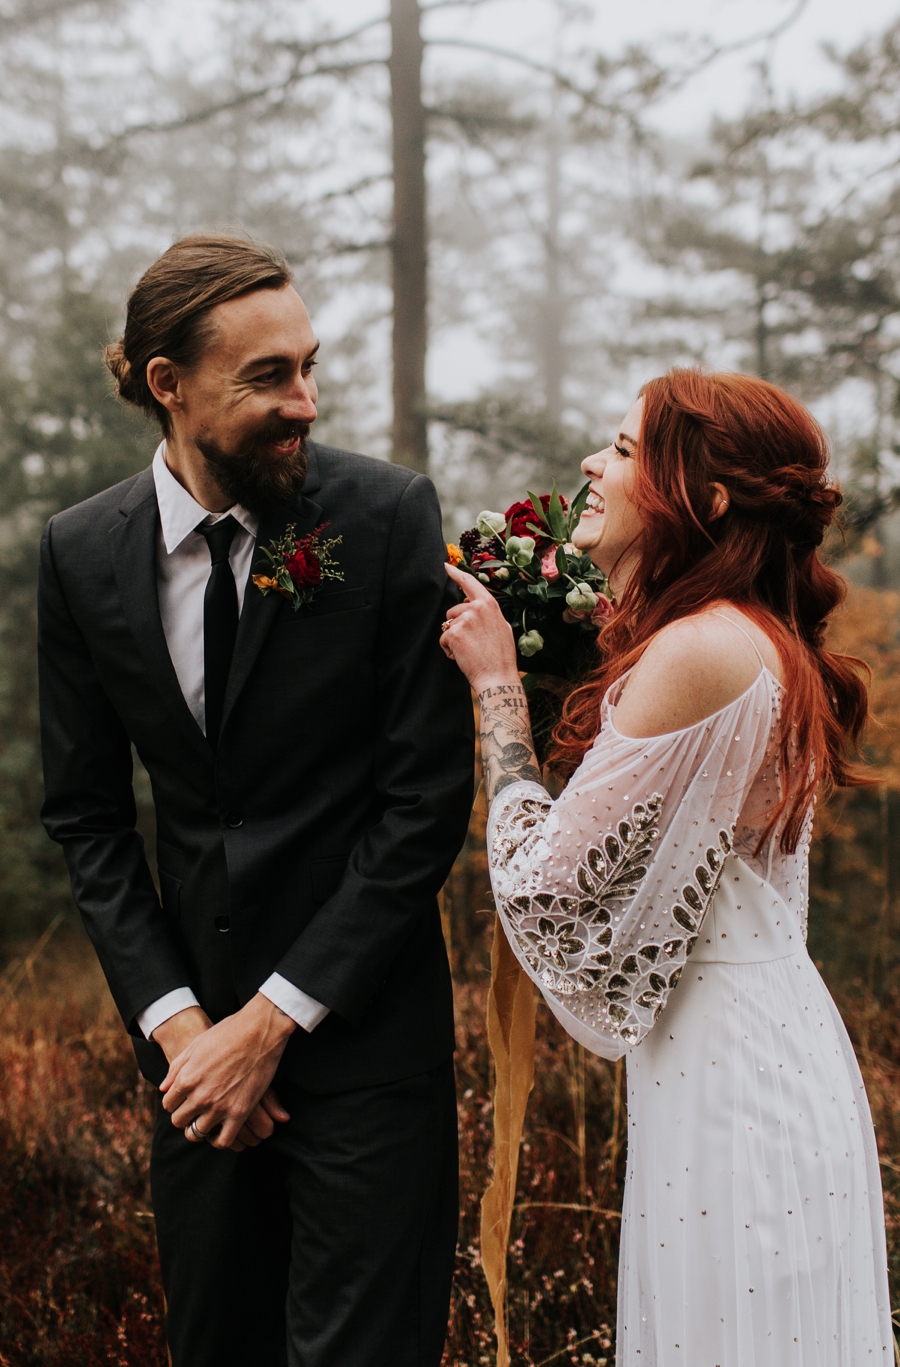 authentic wedding photographer, emotional first look in the foggy fall forest